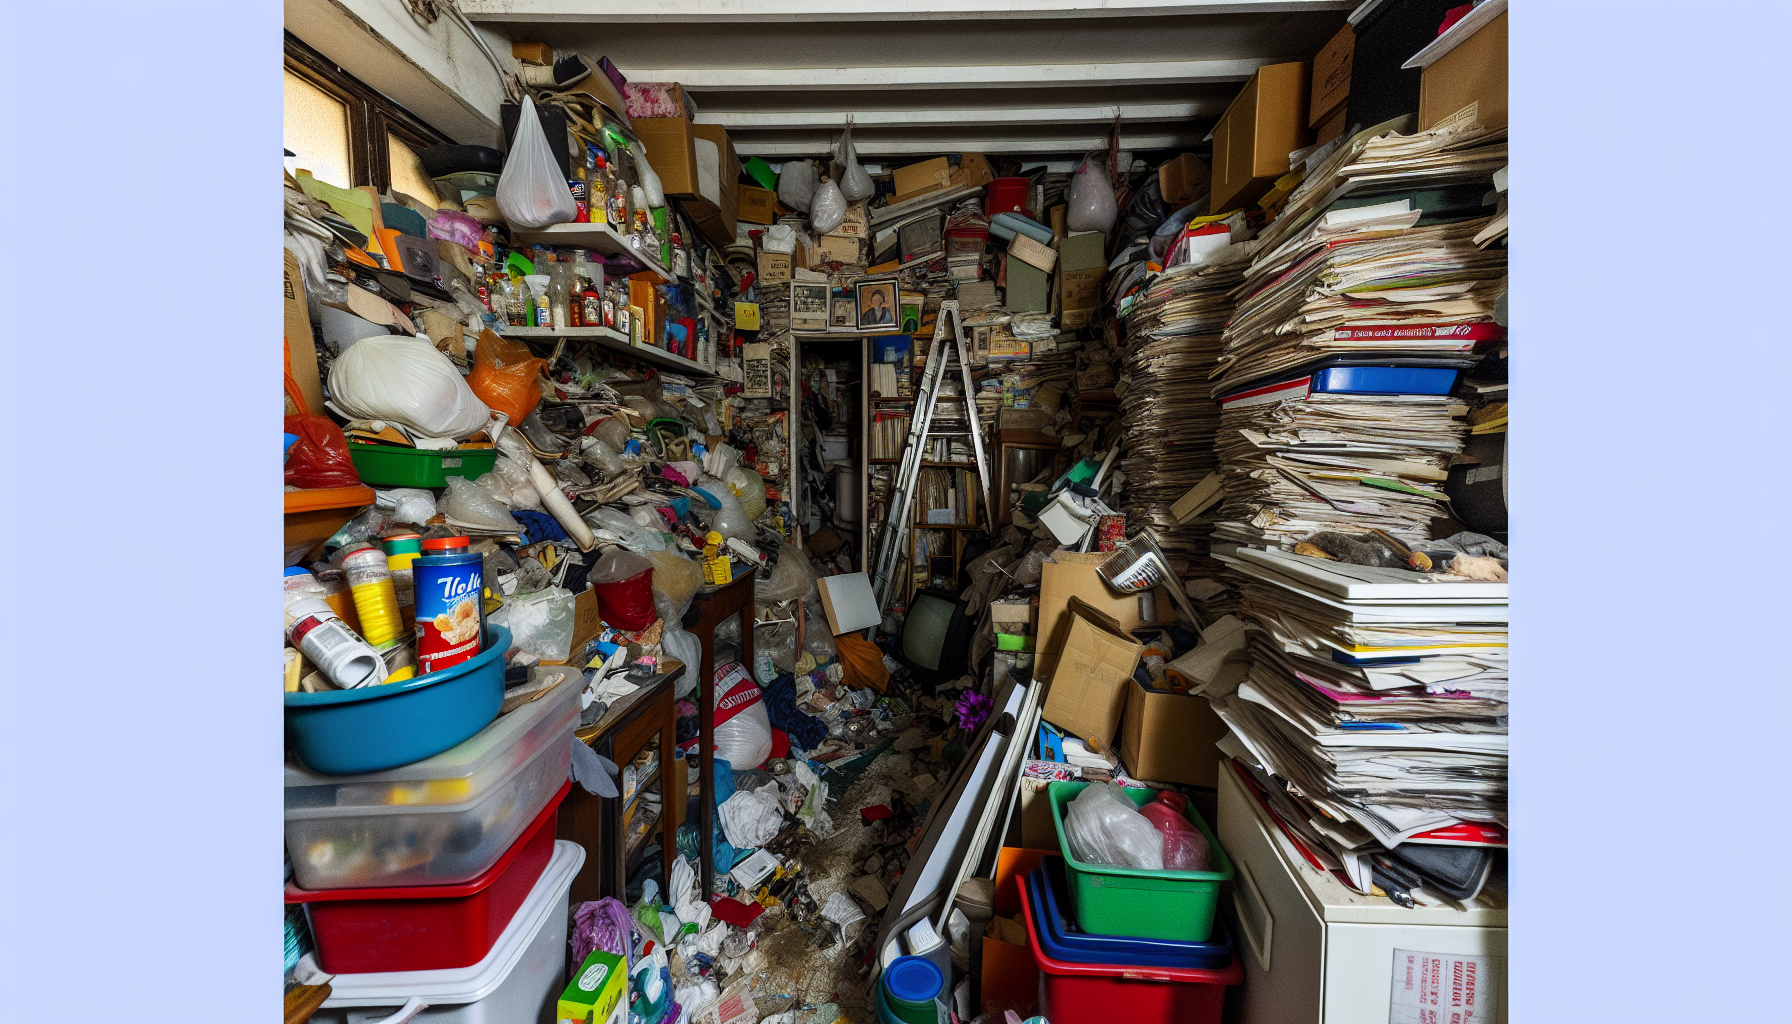 Severe clutter with blocked exits and hazardous living conditions